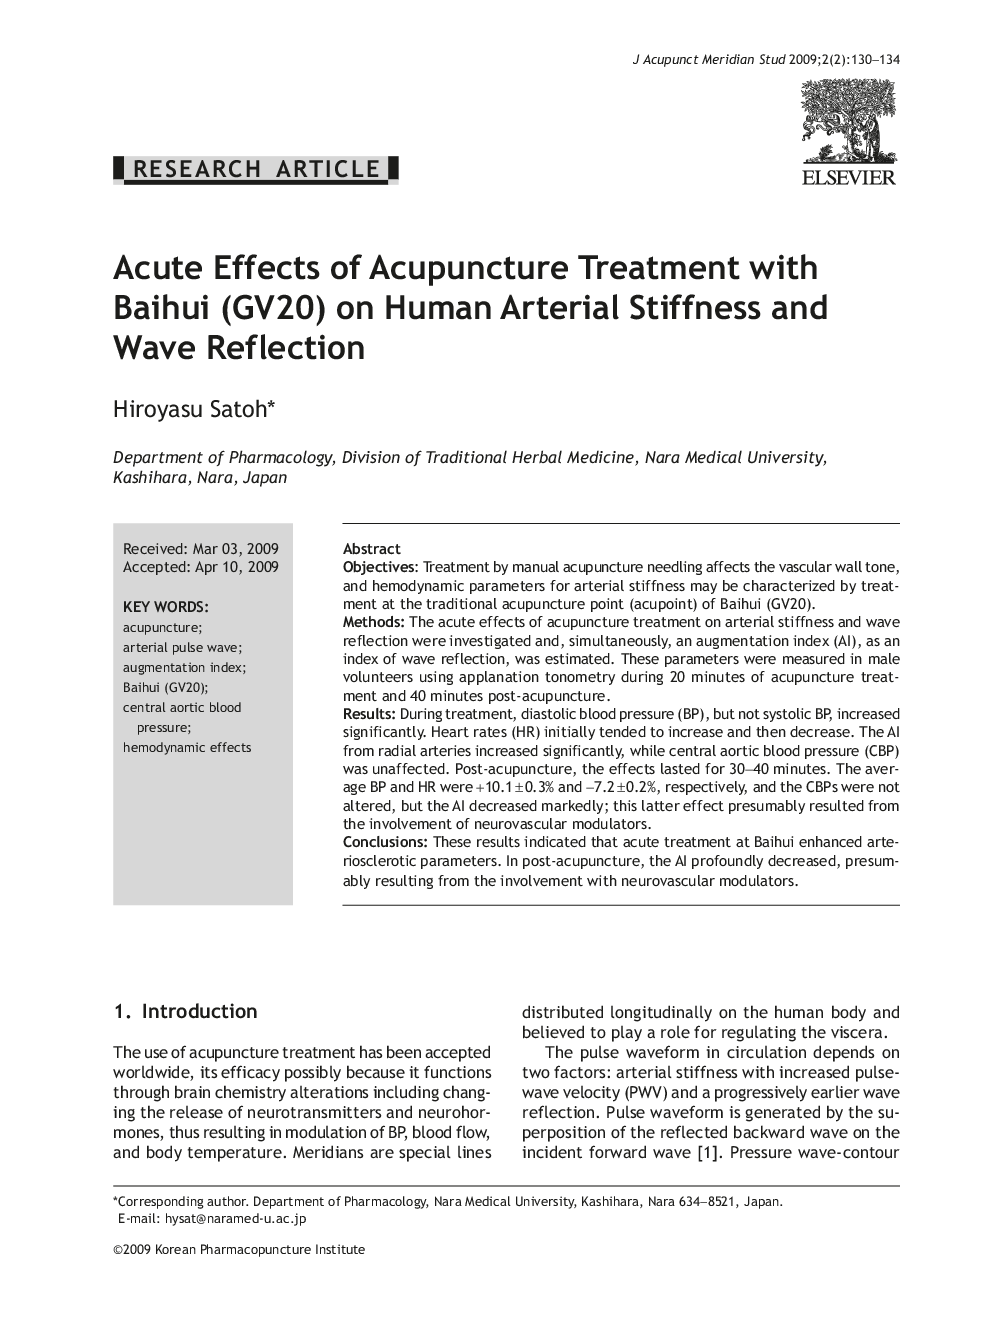 Acute Effects of Acupuncture Treatment with Baihui (GV20) on Human Arterial Stiffness and Wave Reflection